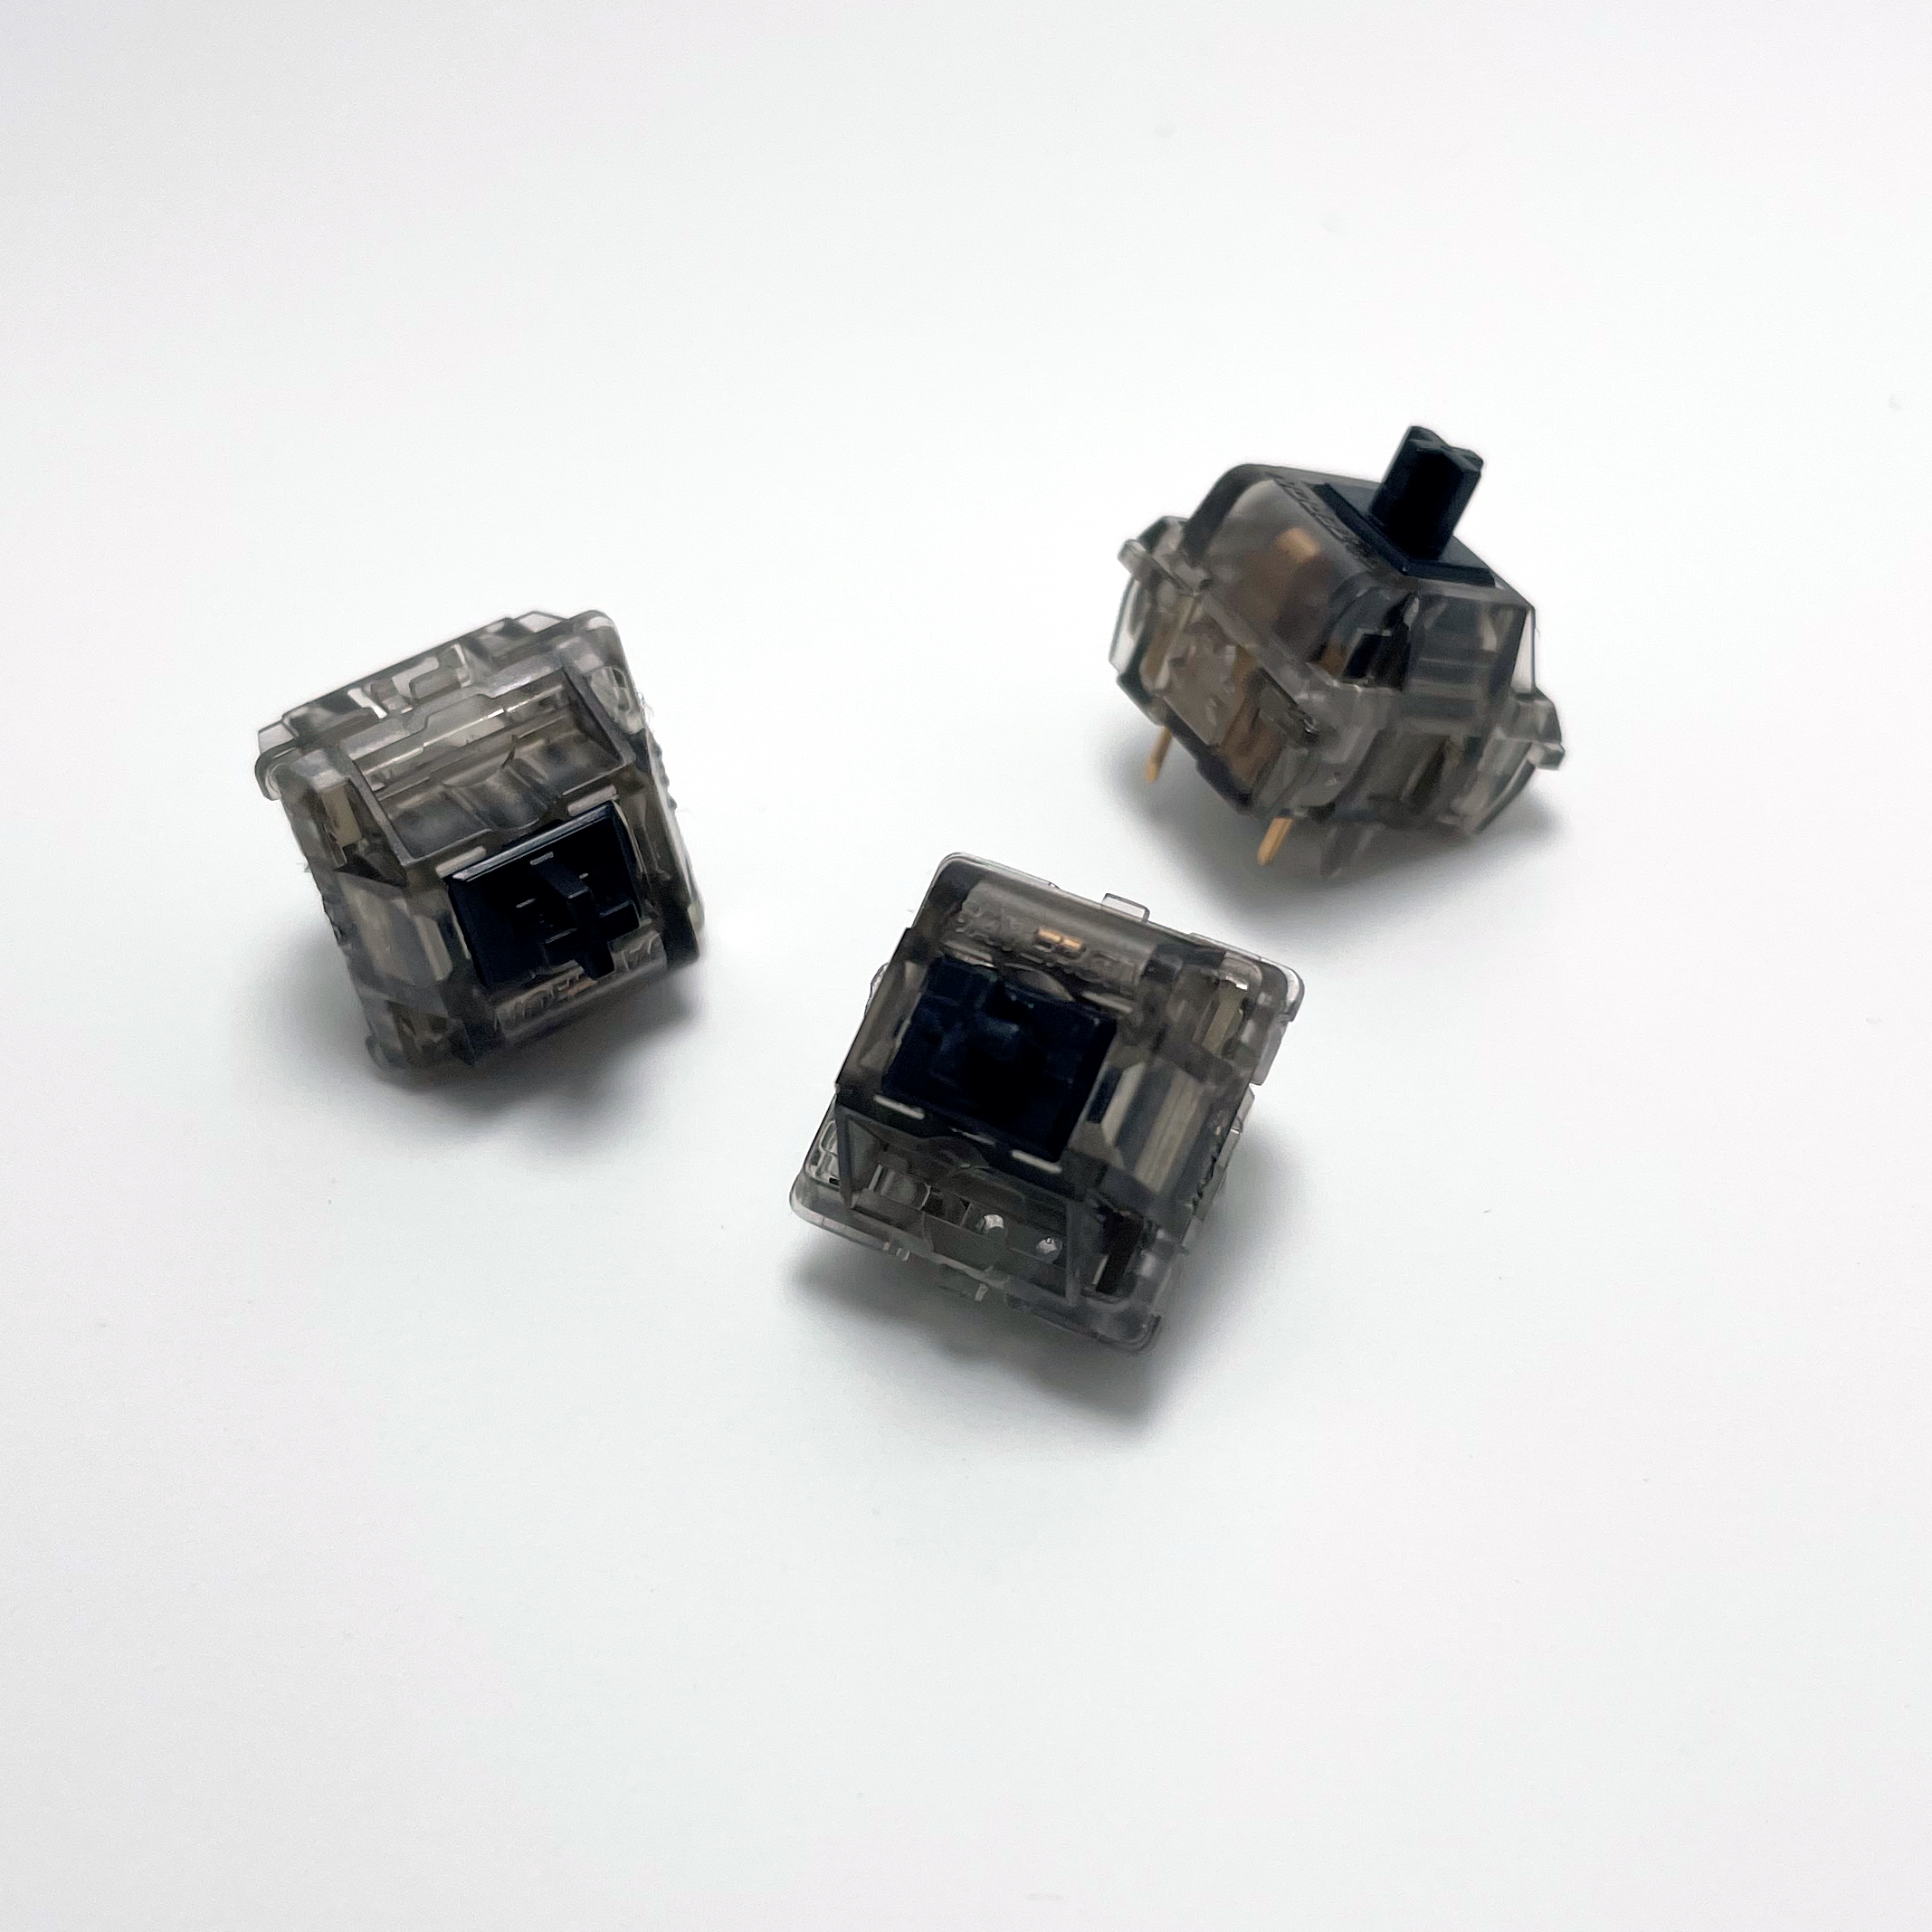 Smooth and Precise: Discover the Gateron Black Ink V2 Mechanical Keyboard Switches